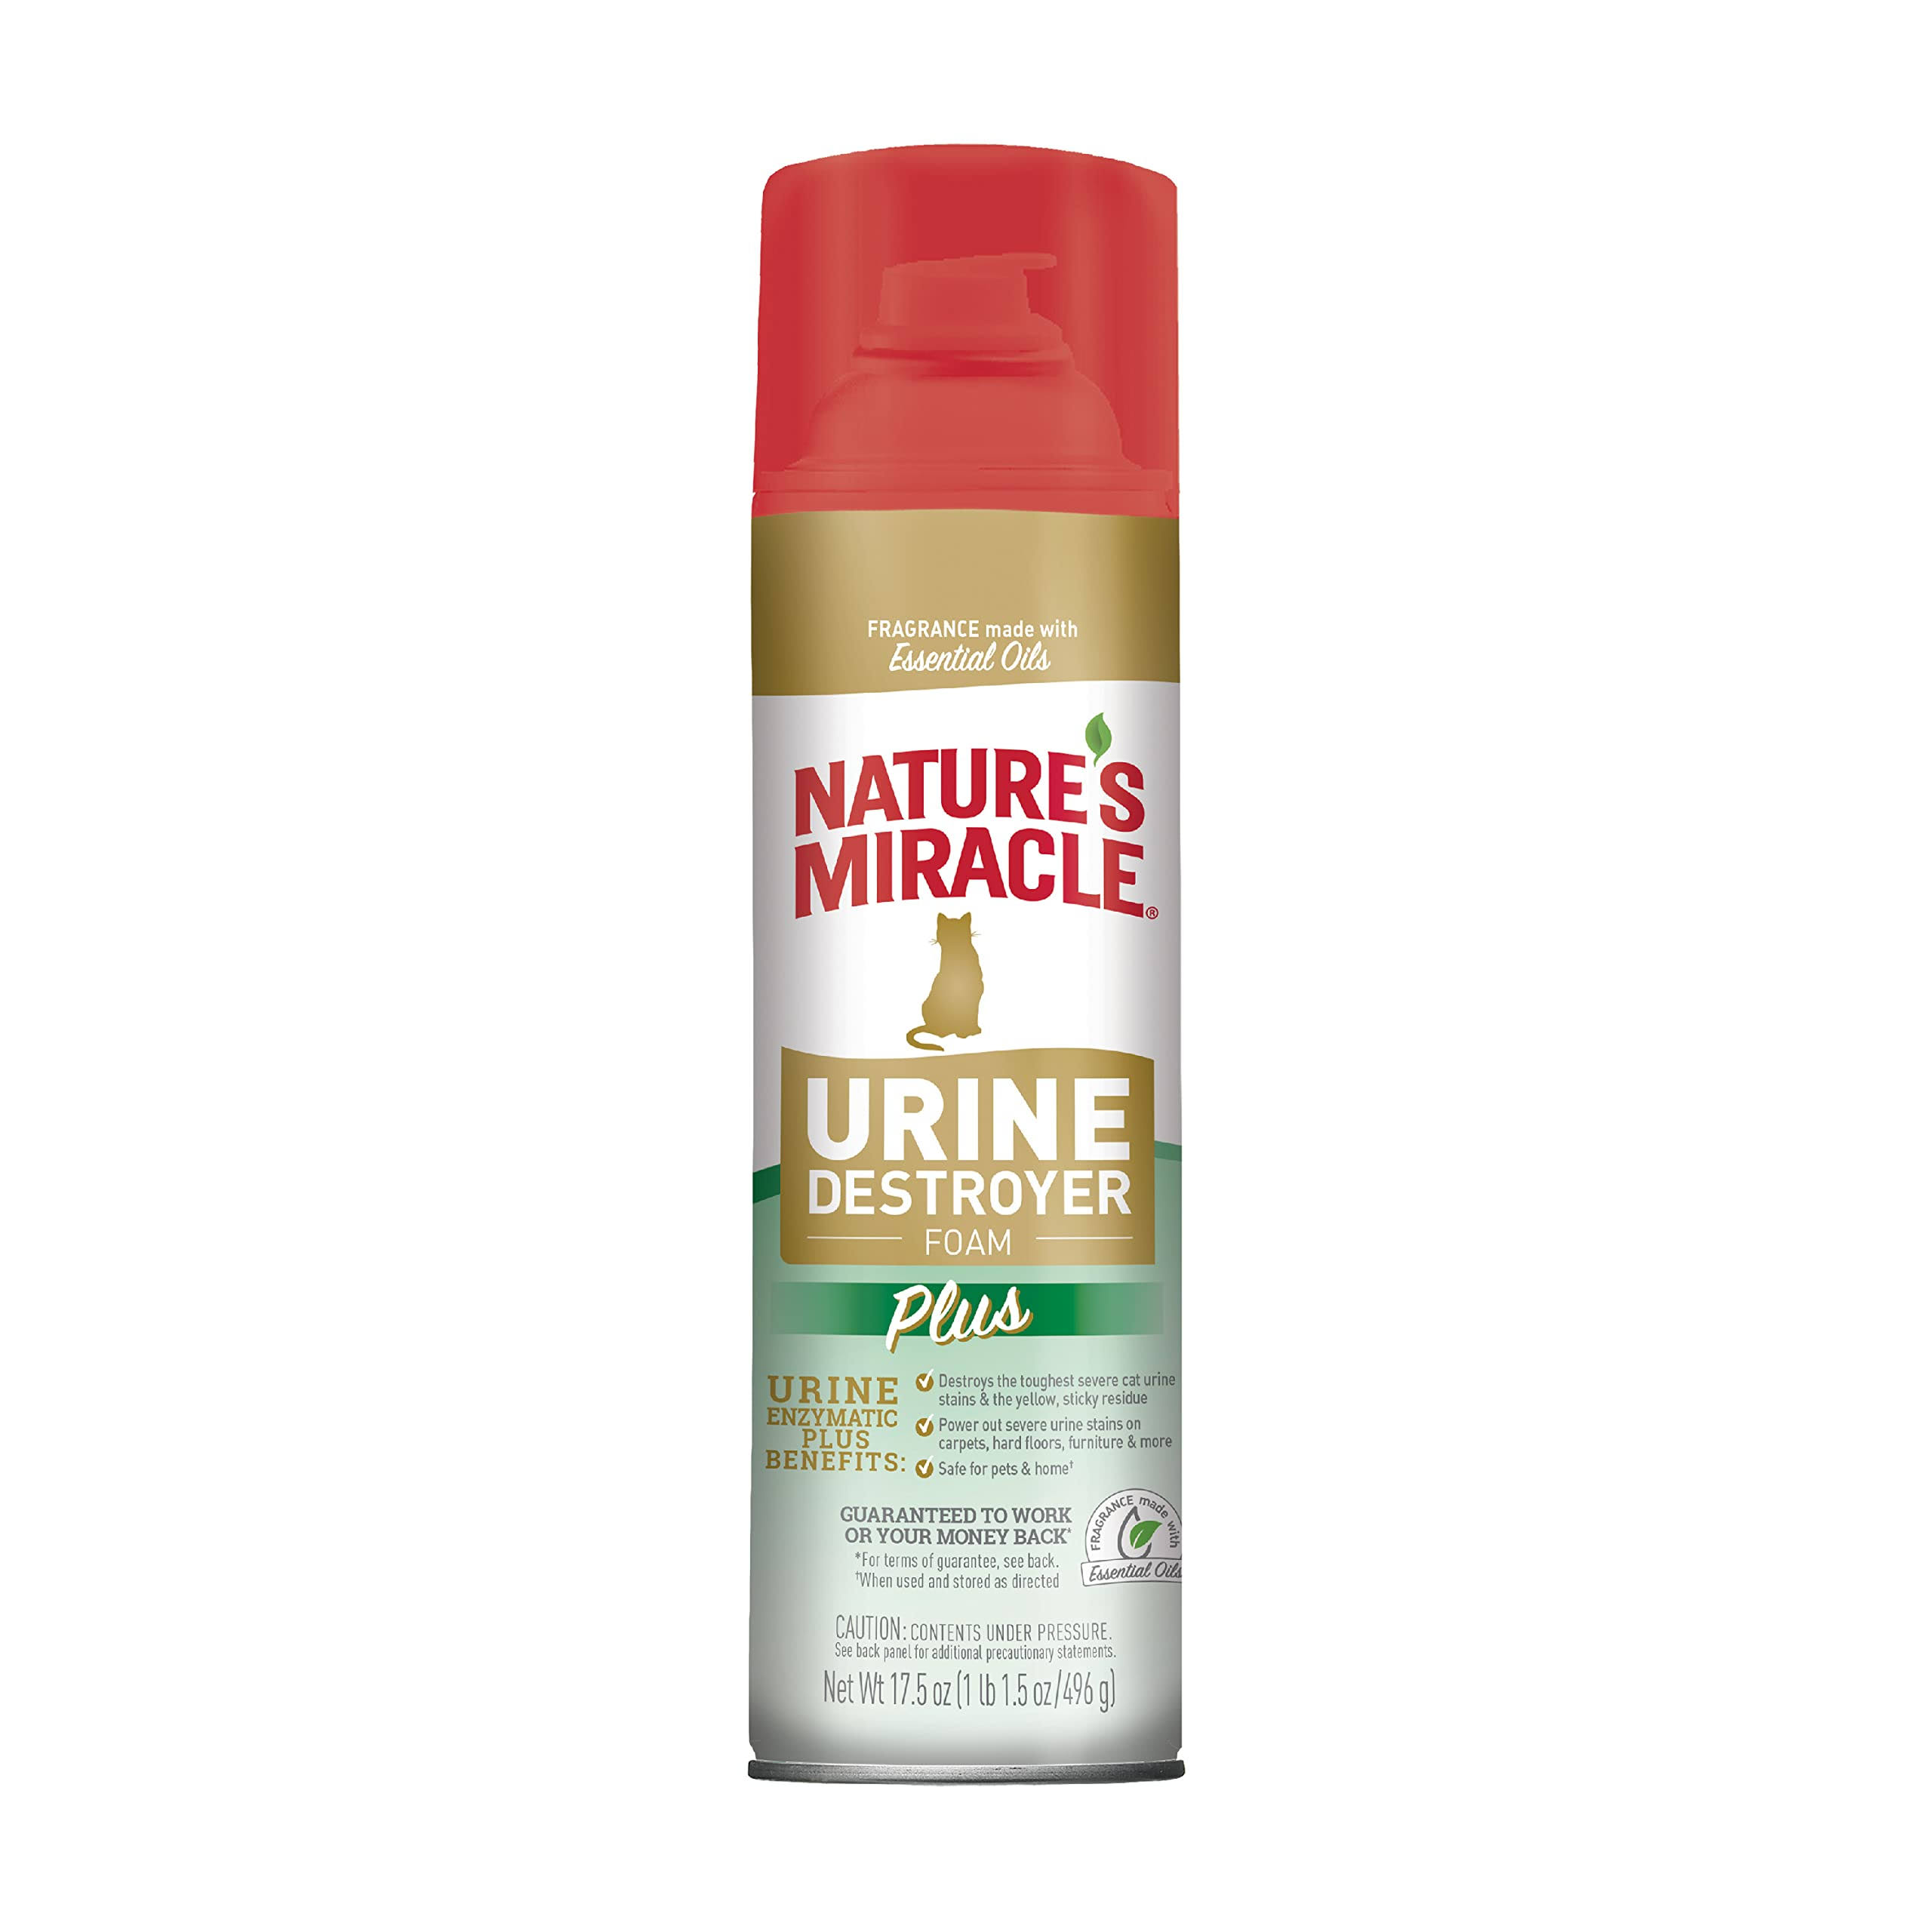 Nature's Miracle Urine Destroyer Plus For Cats, 17.5 Ounces, Foaming Aerosol For Tough Urine Messes